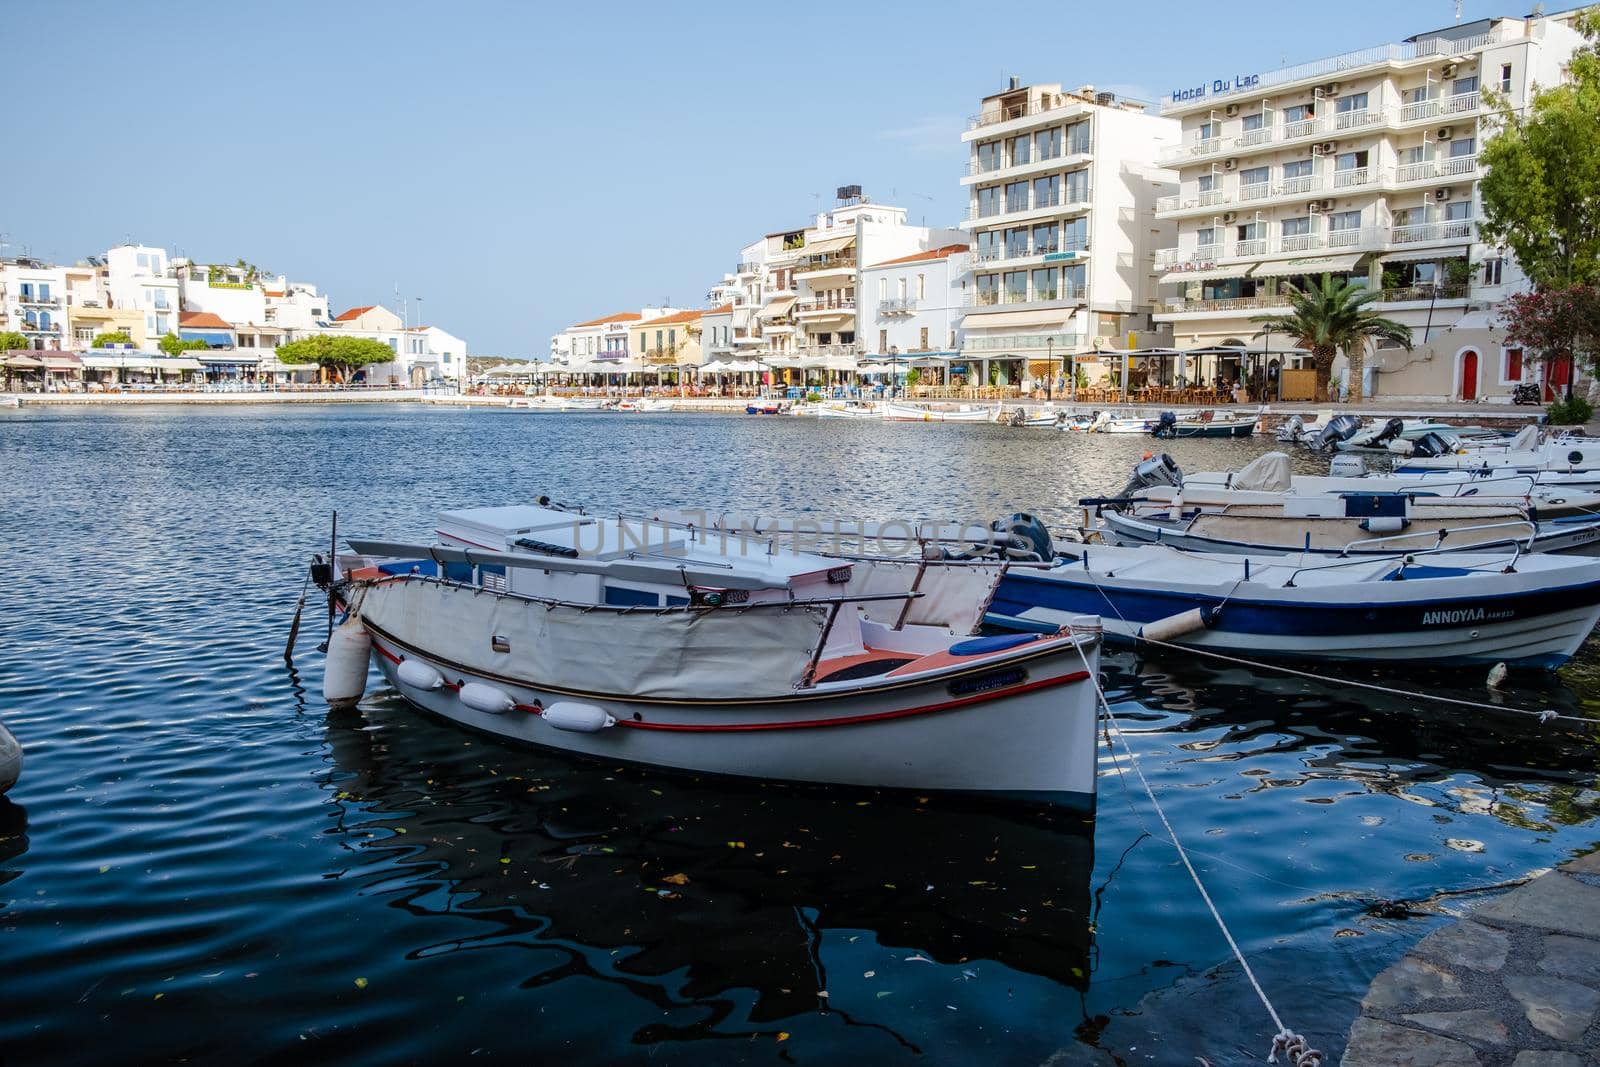 Agios Nikolaos, Crete, Greece. Agios Nikolaos is a picturesque town in the eastern part of the island Crete built on the northwest side of the peaceful bay of Mirabello by fokkebok